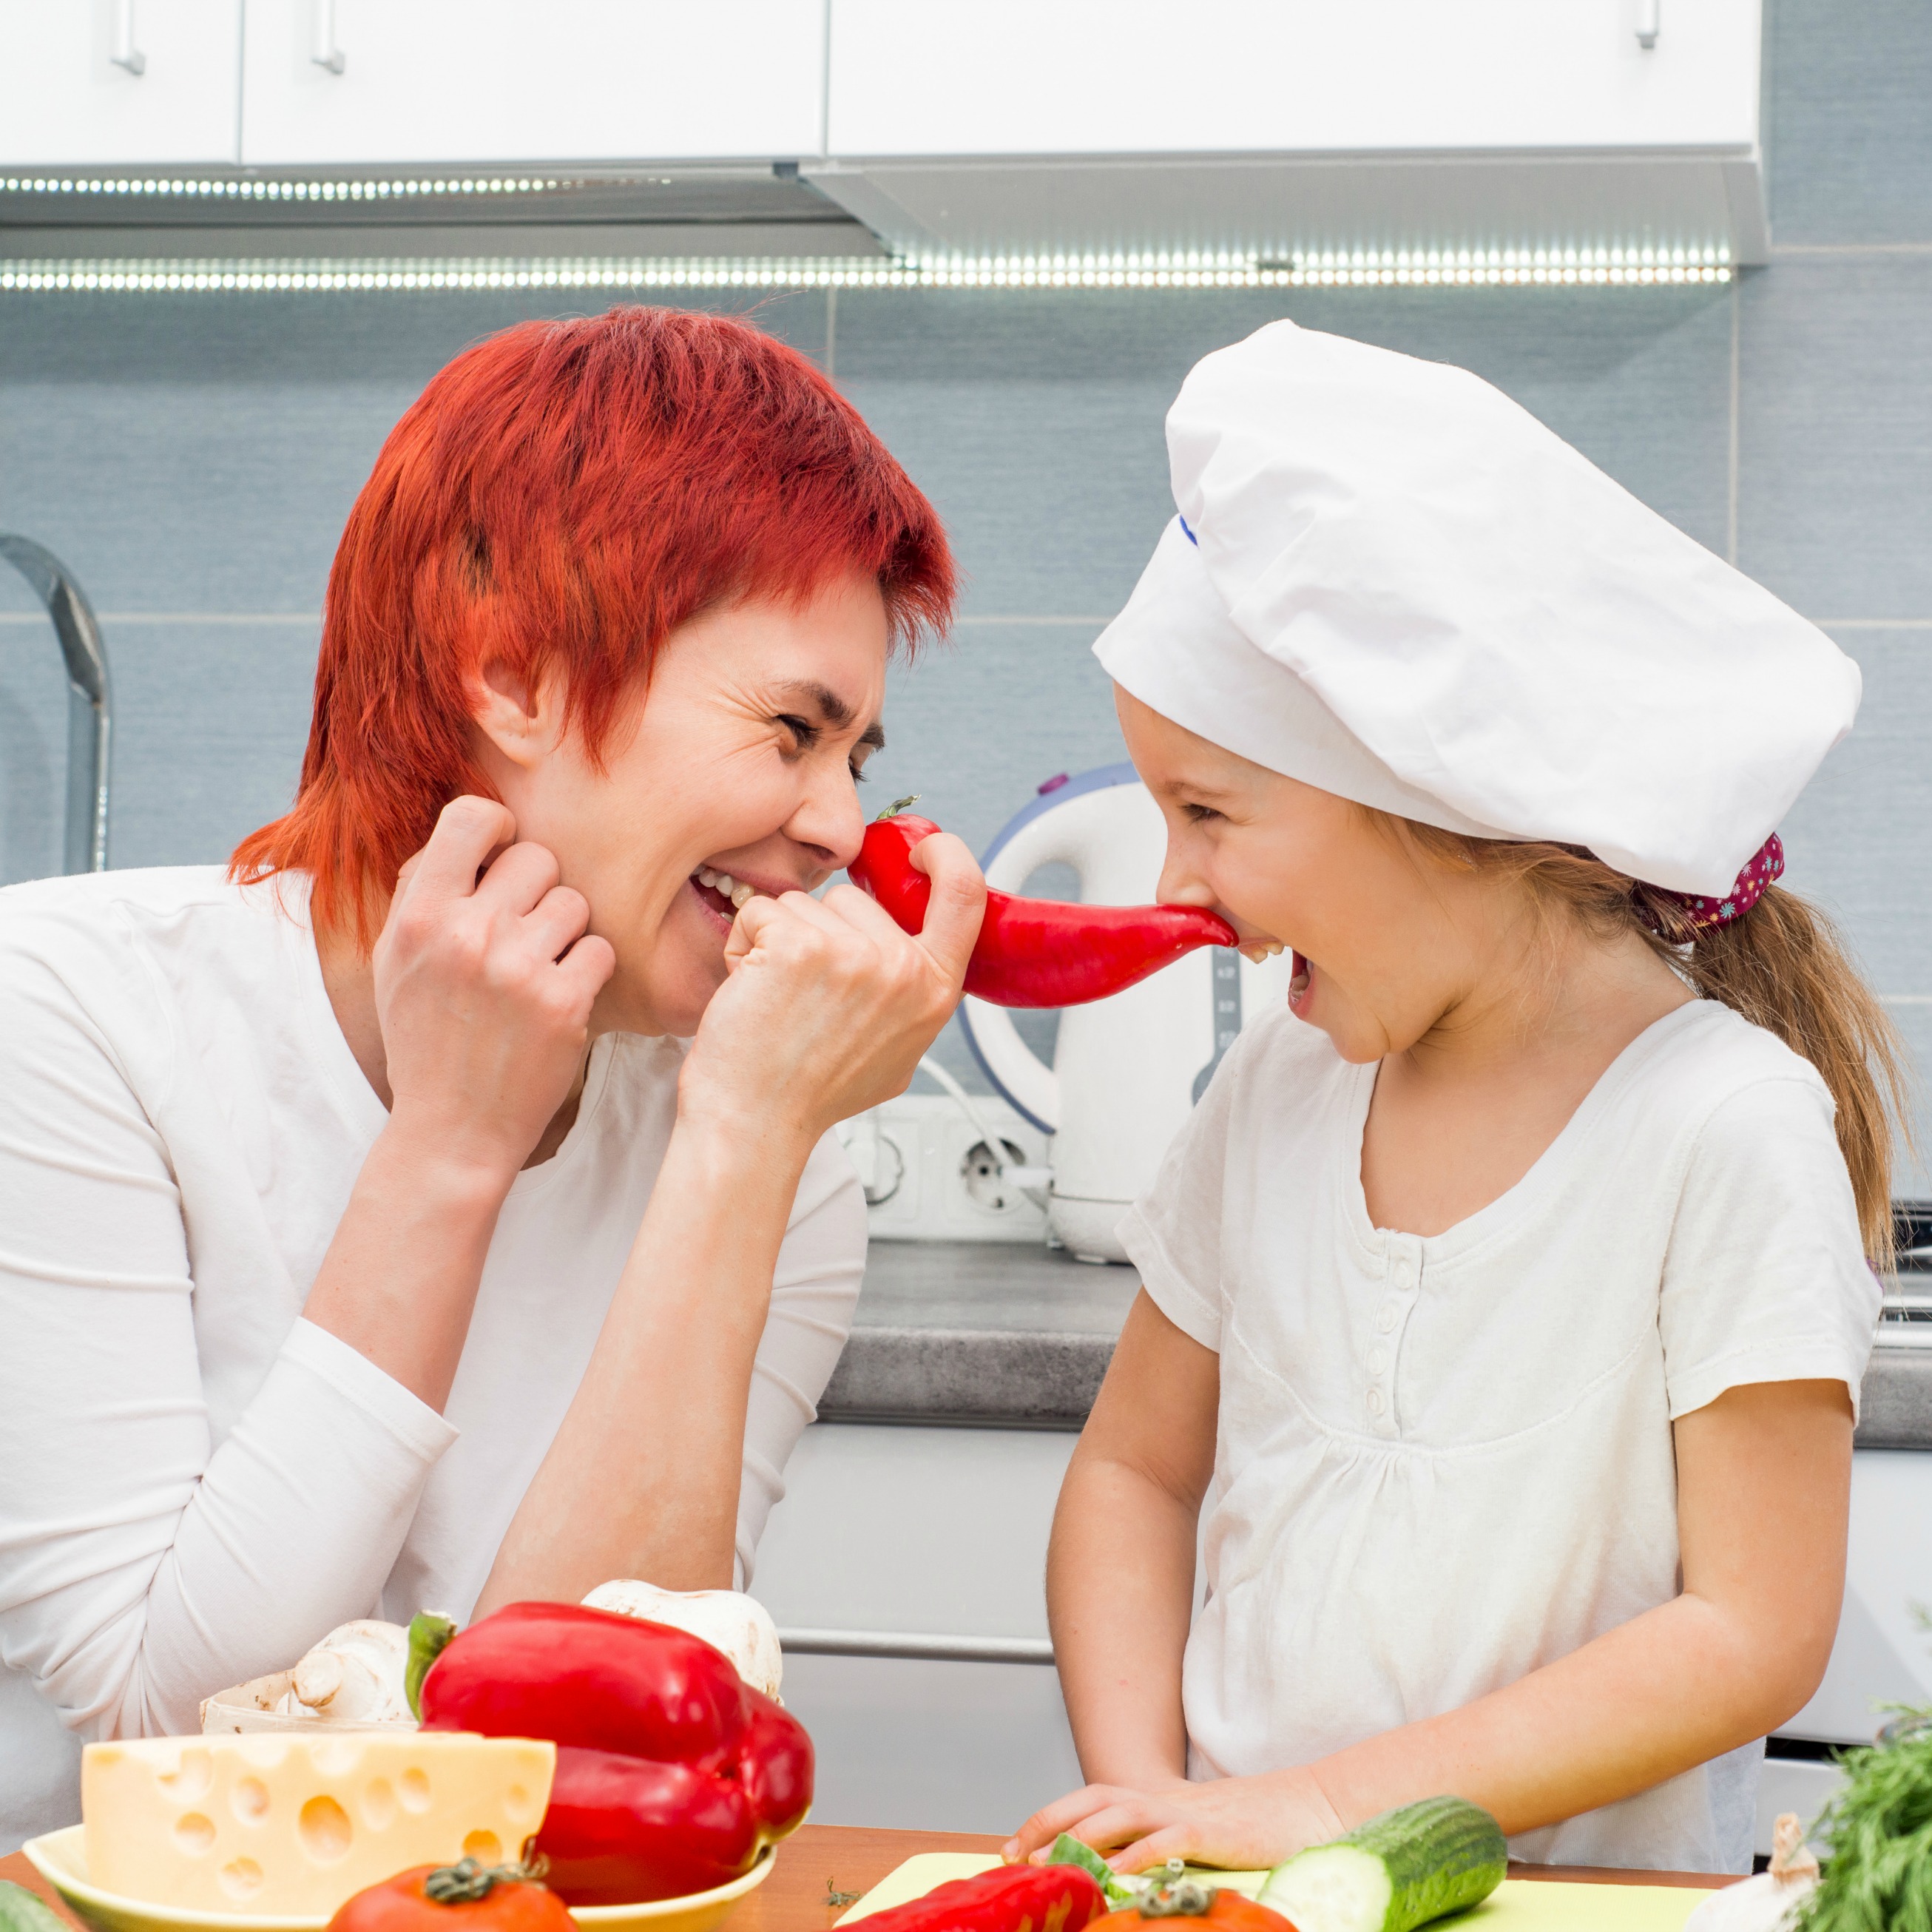 Healthy Meals for Kids: Get Inspired by These 5 Global Cuisines